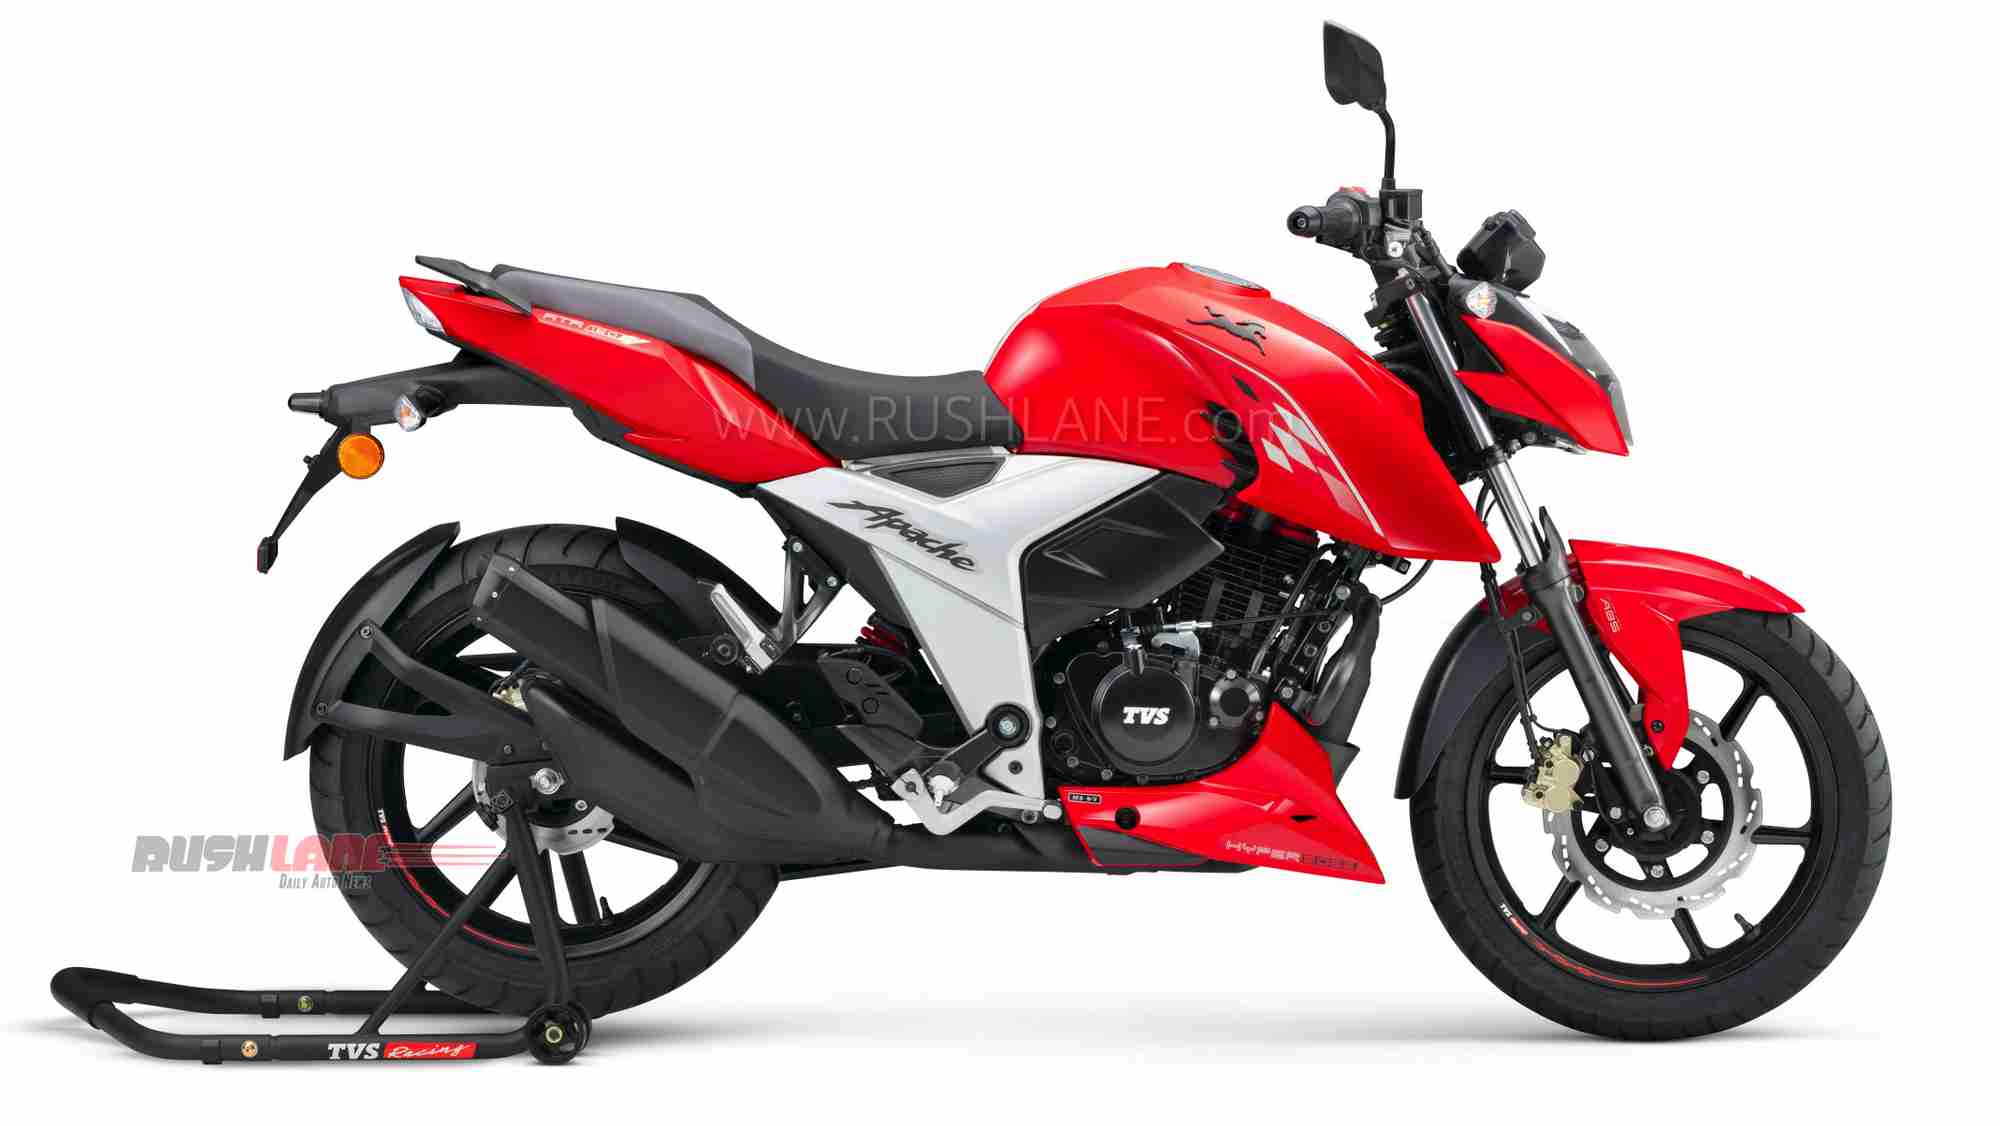 2020 Tvs Apache 200 Bs6 Launch Price Rs 1 24 Lakhs Tvc Video